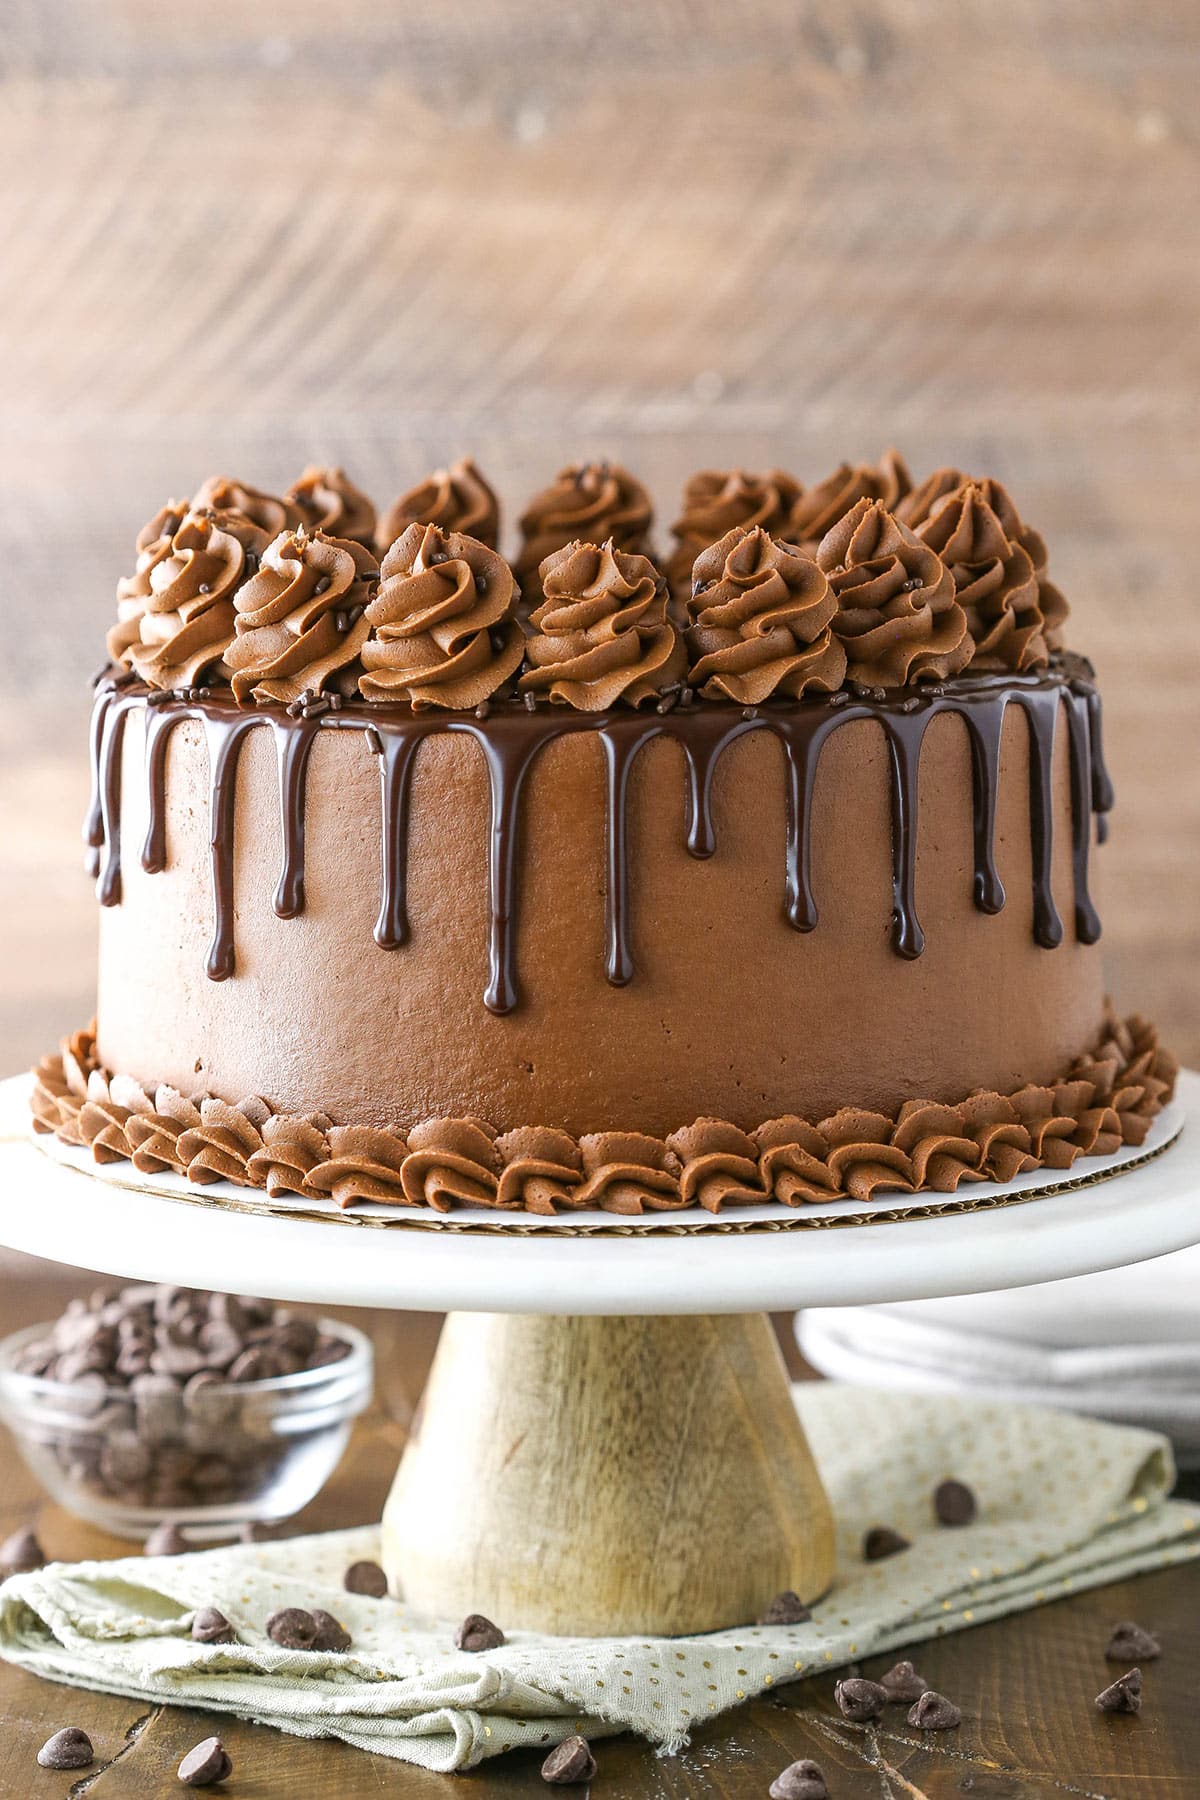 20 Mouthwatering Homemade Cake Recipes | Beyond Frosting